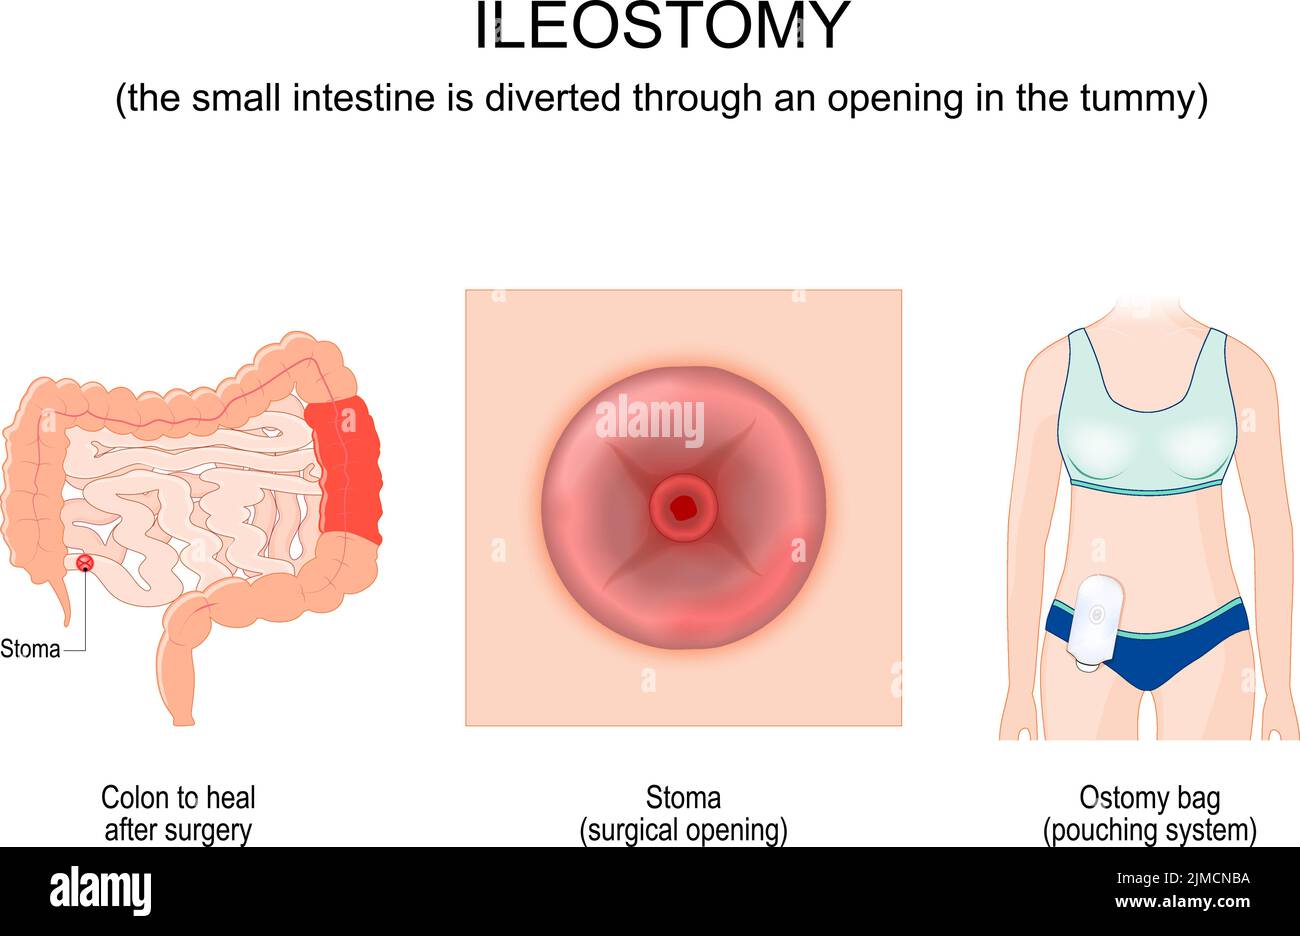 Ileostomy. the small intestine is diverted through an opening in the tummy. Colon to heal after surgery. Close-up of a Stoma or surgical opening Stock Vector